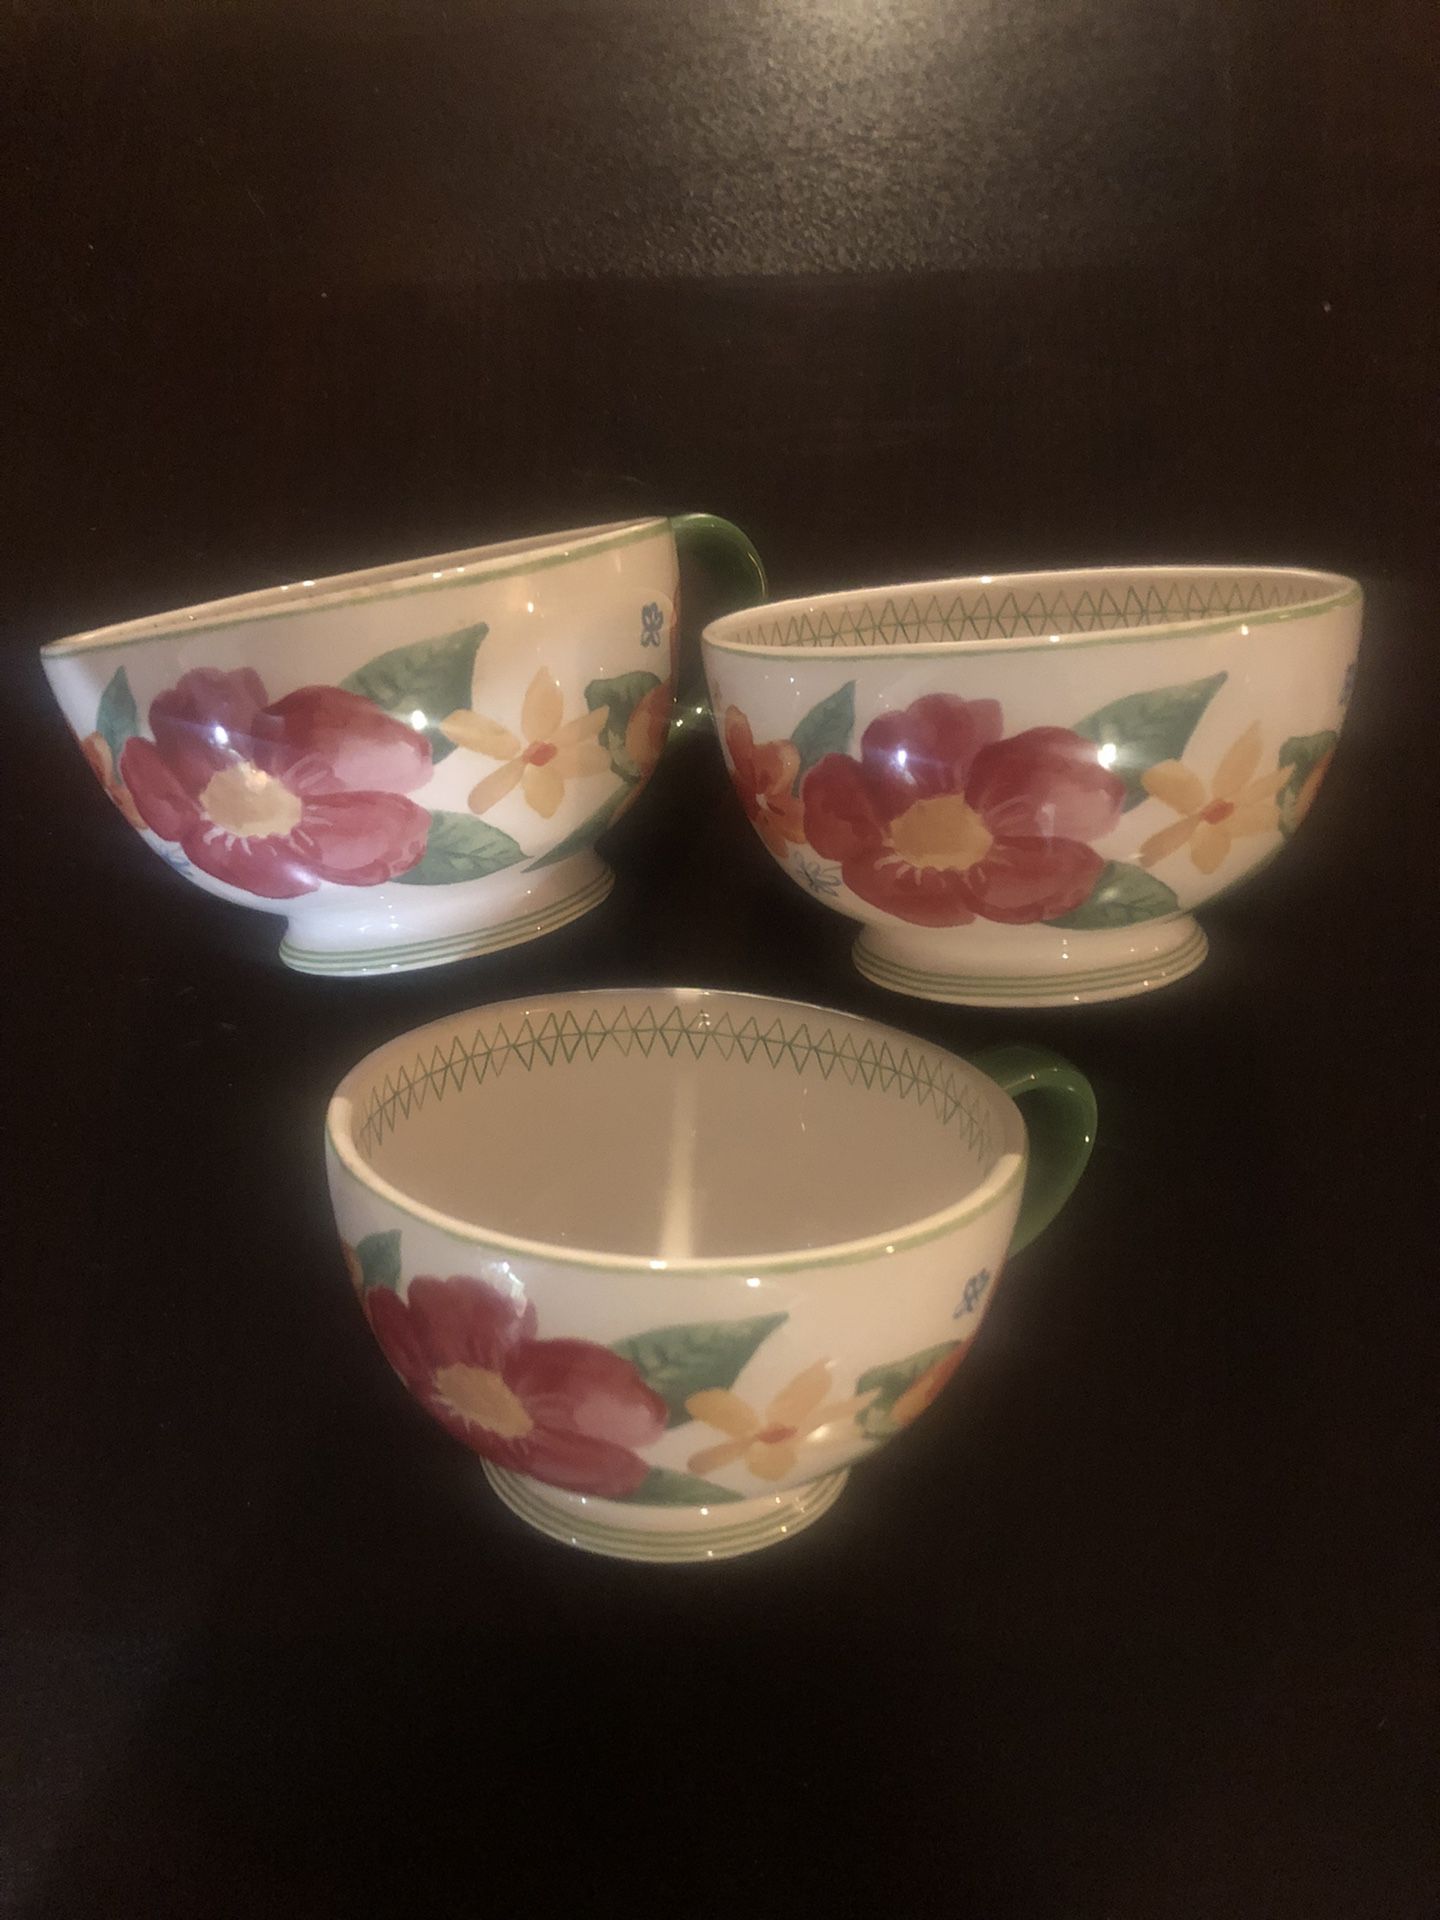 Pier One Imports Floral Ironstone Mugs 